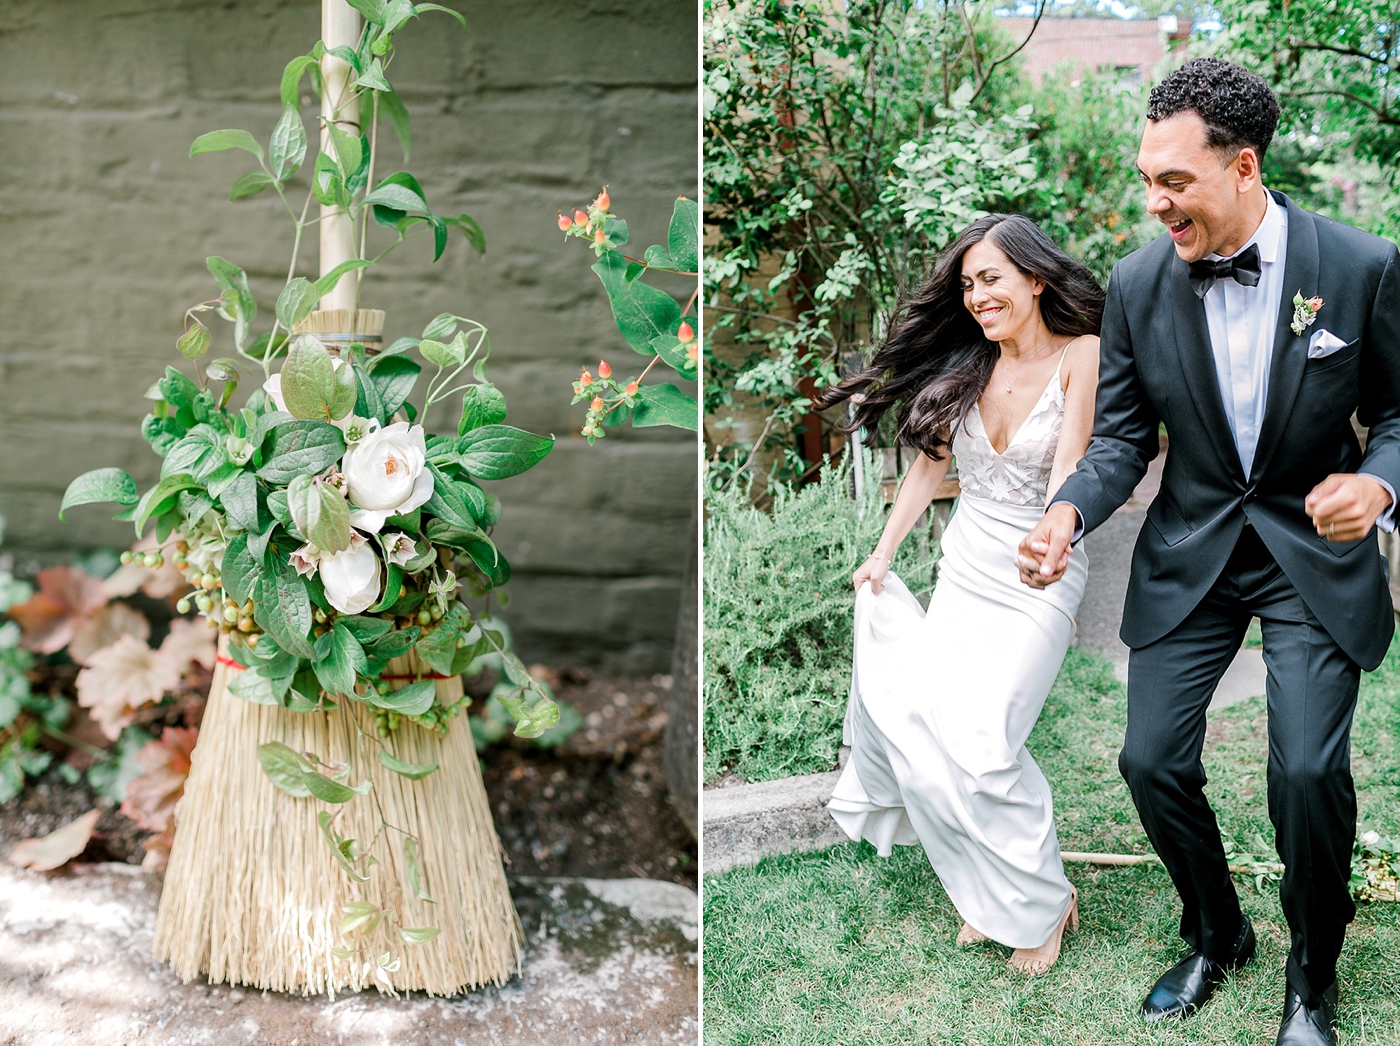 Jumping the Broom wedding tradition